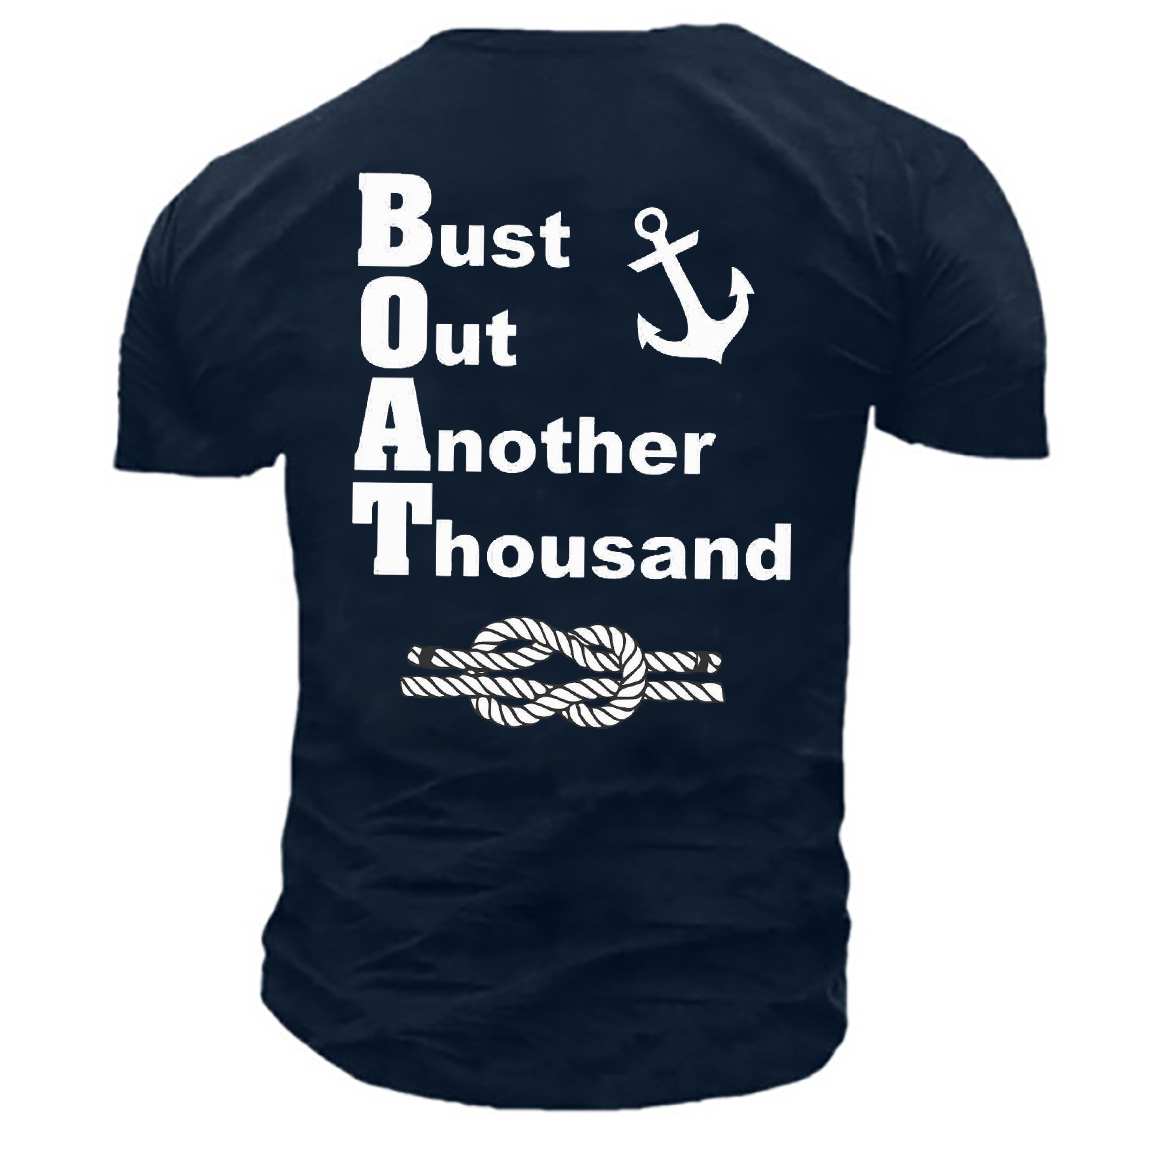 Men's Bust Out Another Chic Thousand Anchor Print Cotton T-shirt